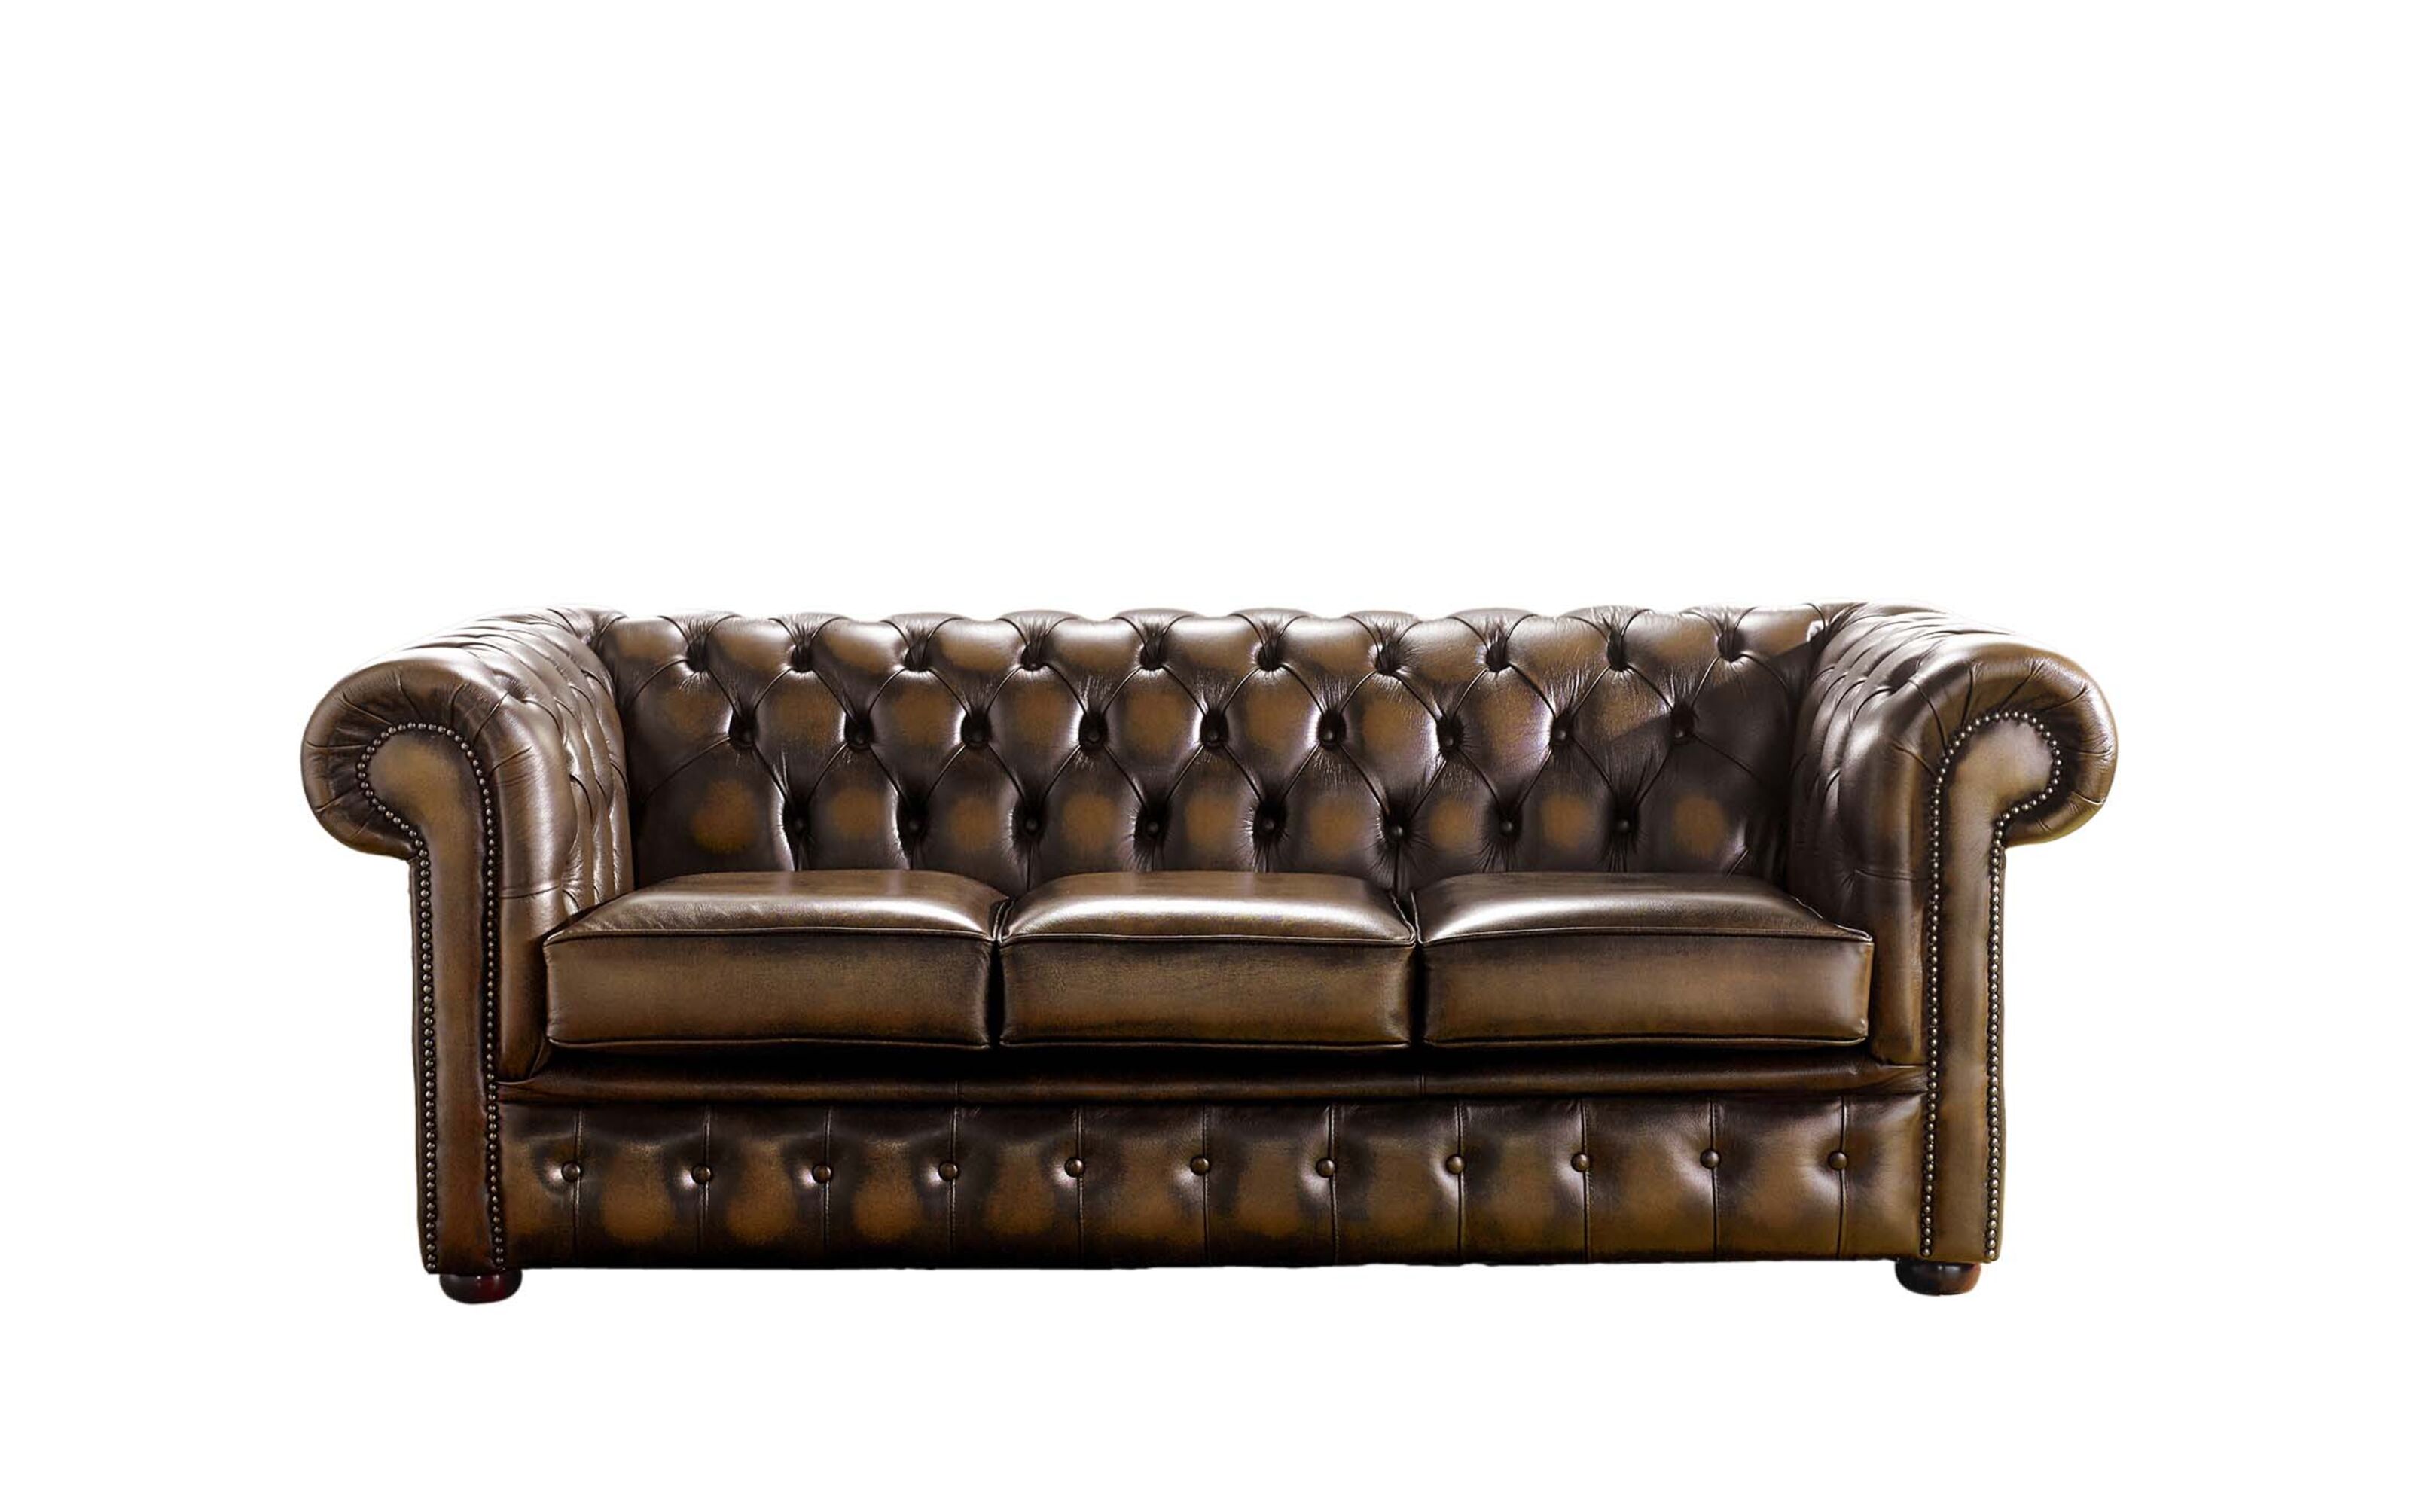 Deciphering Seating Couch, Sofa, and Chesterfield Distinctions Unveiled  %Post Title